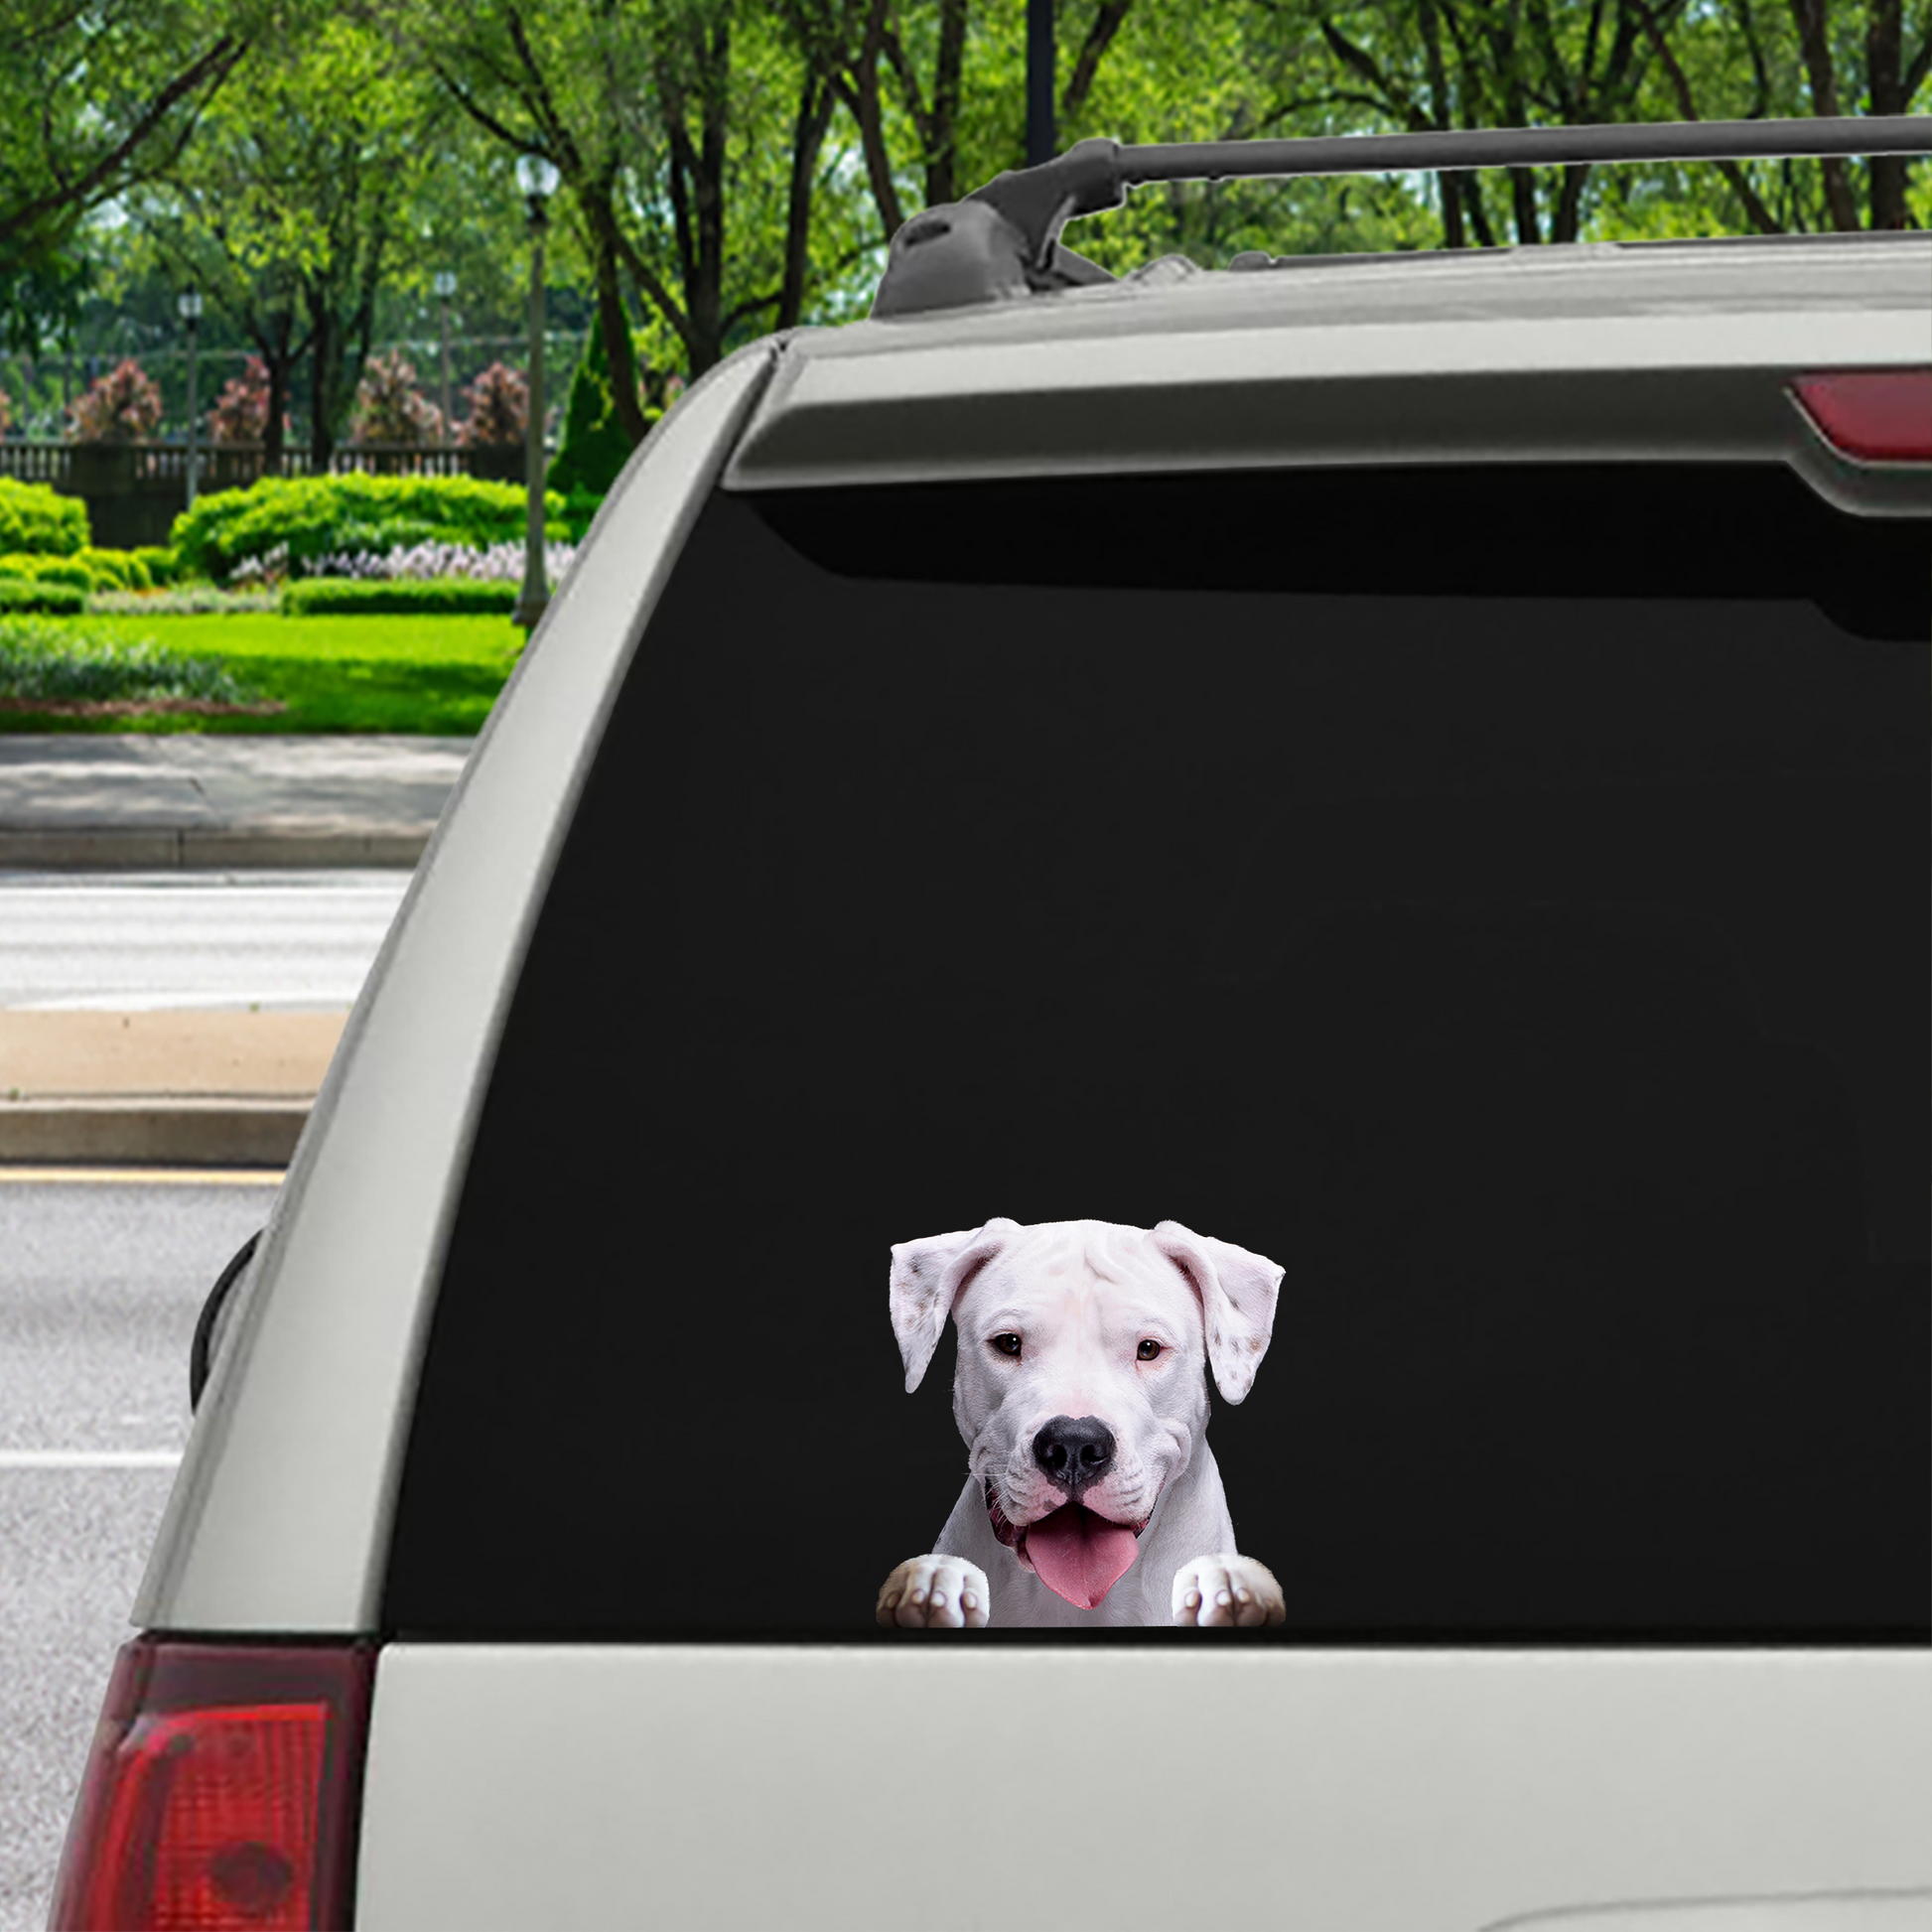 Can You See Me Now - Dogo Argentino Car/ Door/ Fridge/ Laptop Sticker V1